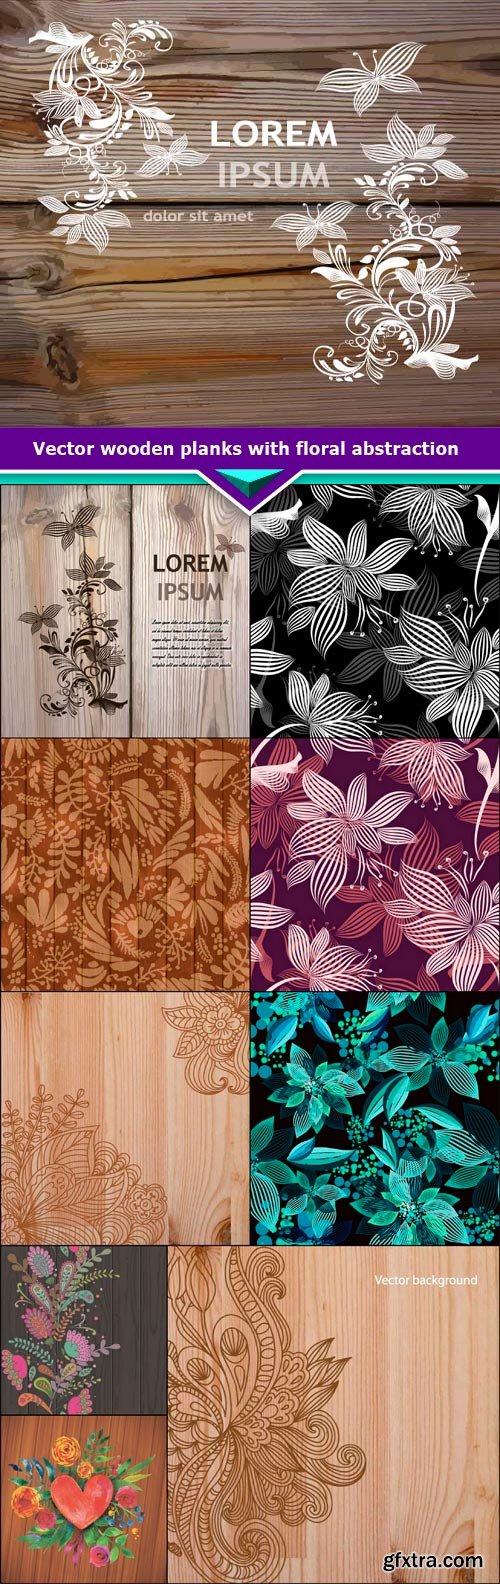 Vector wooden planks with floral abstraction 10x EPS